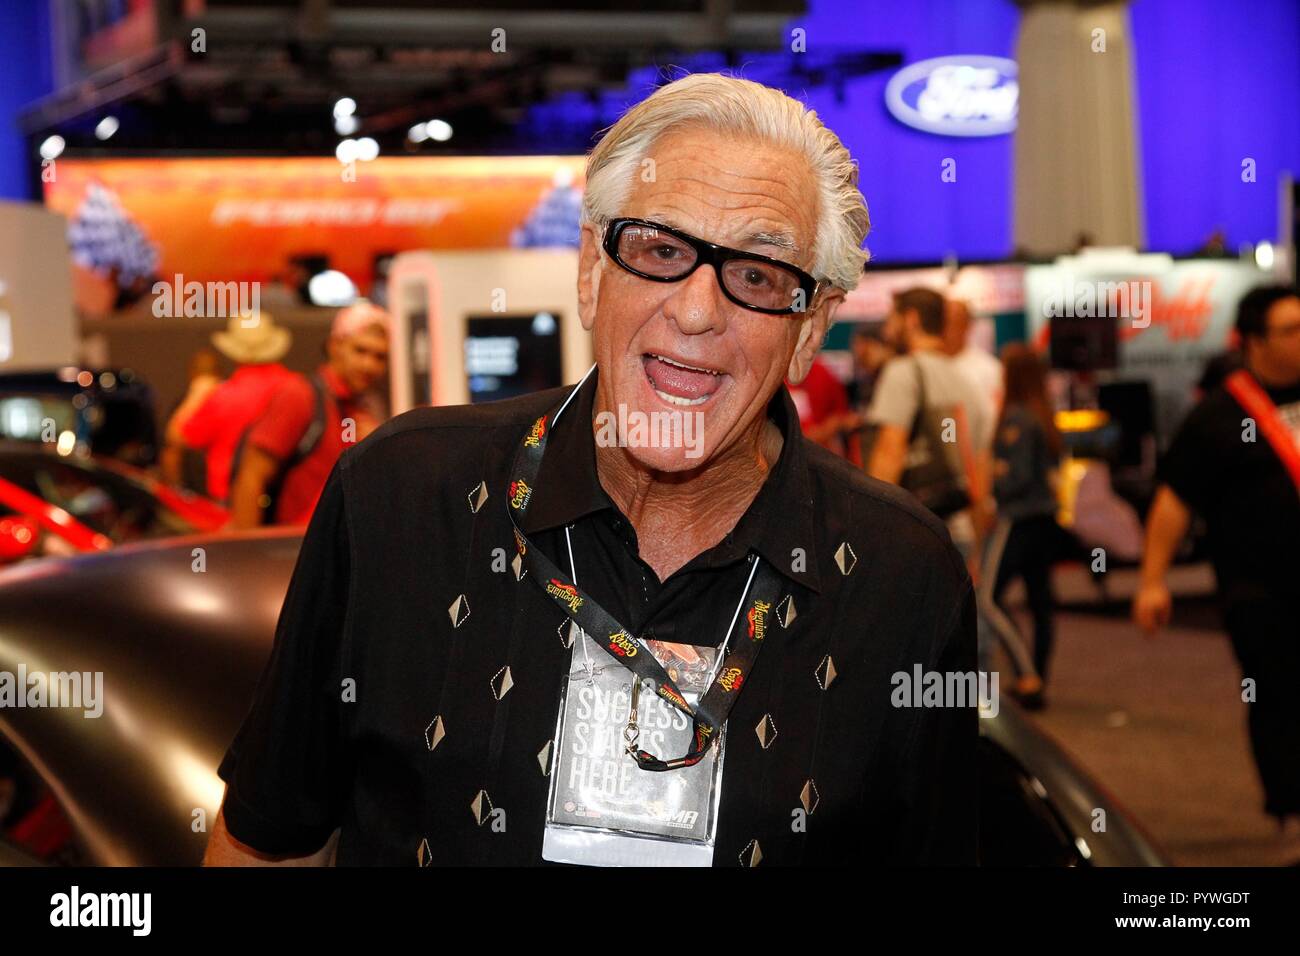 Las Vegas, NV, USA. 30th Oct, 2018. Barry Weiss of 'Storage Wars' in  attendance for 2018 Specialty Equipment Market Association SEMA Show - TUE, Las  Vegas Convention Center, Las Vegas, NV October